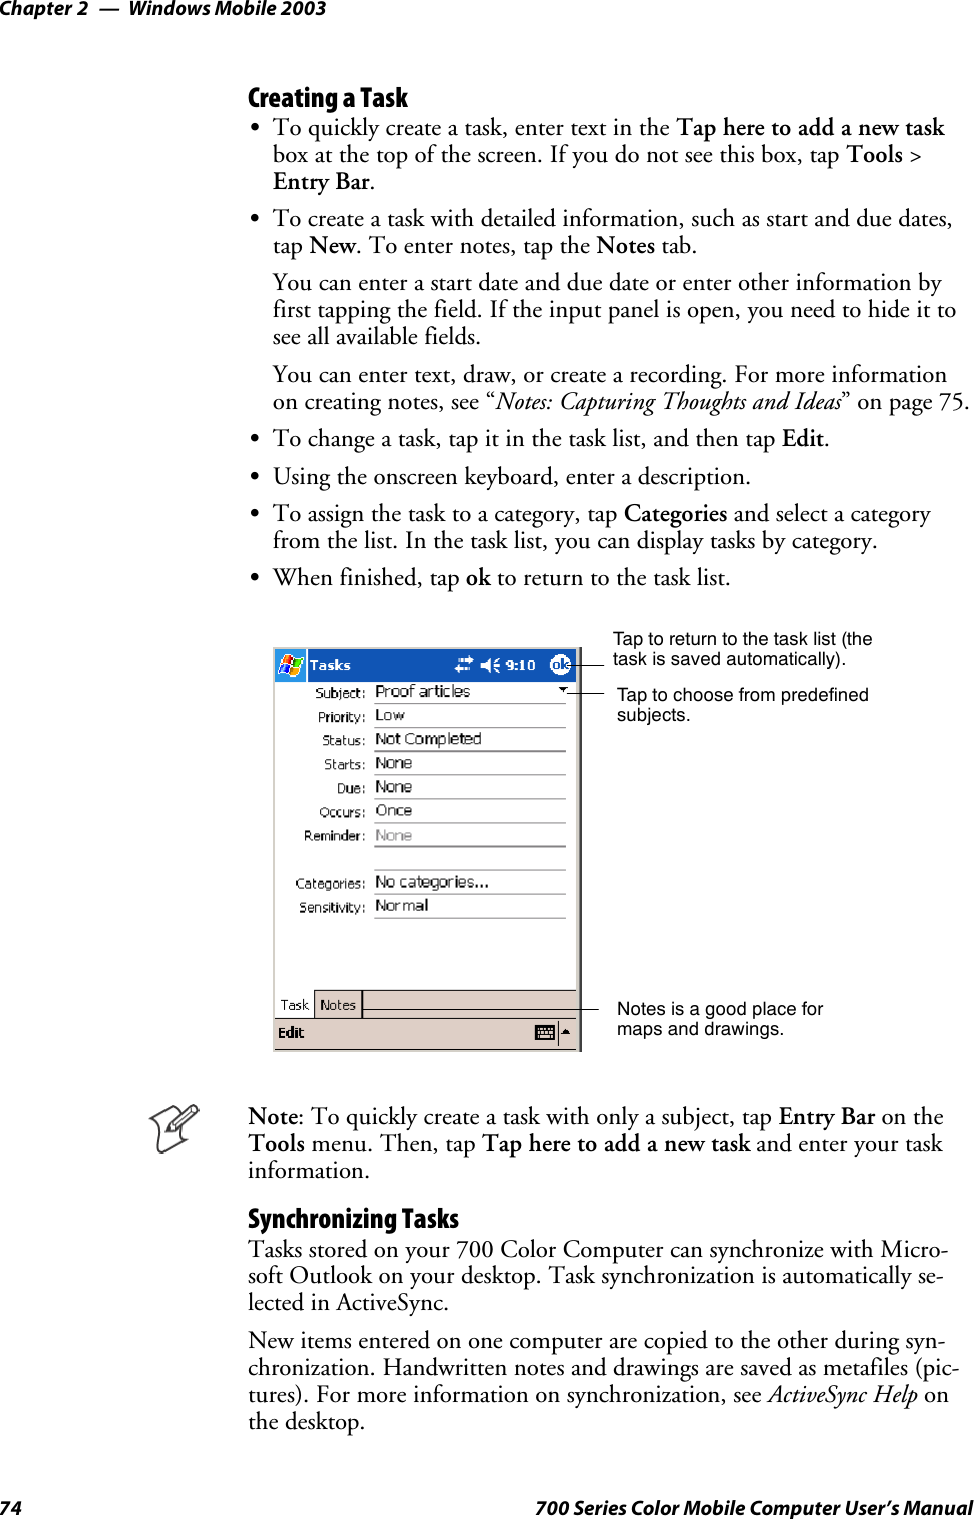 Windows Mobile 2003Chapter —274 700 Series Color Mobile Computer User’s ManualCreating a TaskSTo quickly create a task, enter text in the Tap here to add a new taskbox at the top of the screen. If you do not see this box, tap Tools &gt;Entry Bar.STo create a task with detailed information, such as start and due dates,tap New. To enter notes, tap the Notes tab.You can enter a start date and due date or enter other information byfirst tapping the field. If the input panel is open, you need to hide it tosee all available fields.You can enter text, draw, or create a recording. For more informationon creating notes, see “Notes: Capturing Thoughts and Ideas” on page 75.STo change a task, tap it in the task list, and then tap Edit.SUsing the onscreen keyboard, enter a description.STo assign the task to a category, tap Categories and select a categoryfrom the list. In the task list, you can display tasks by category.SWhen finished, tap ok to return to the task list.Taptoreturntothetasklist(thetask is saved automatically).Tap to choose from predefinedsubjects.Notes is a good place formaps and drawings.Note: To quickly create a task with only a subject, tap Entry Bar on theTools menu. Then, tap Tap here to add a new task and enter your taskinformation.Synchronizing TasksTasks stored on your 700 Color Computer can synchronize with Micro-soft Outlook on your desktop. Task synchronization is automatically se-lected in ActiveSync.New items entered on one computer are copied to the other during syn-chronization. Handwritten notes and drawings are saved as metafiles (pic-tures). For more information on synchronization, see ActiveSync Help onthe desktop.